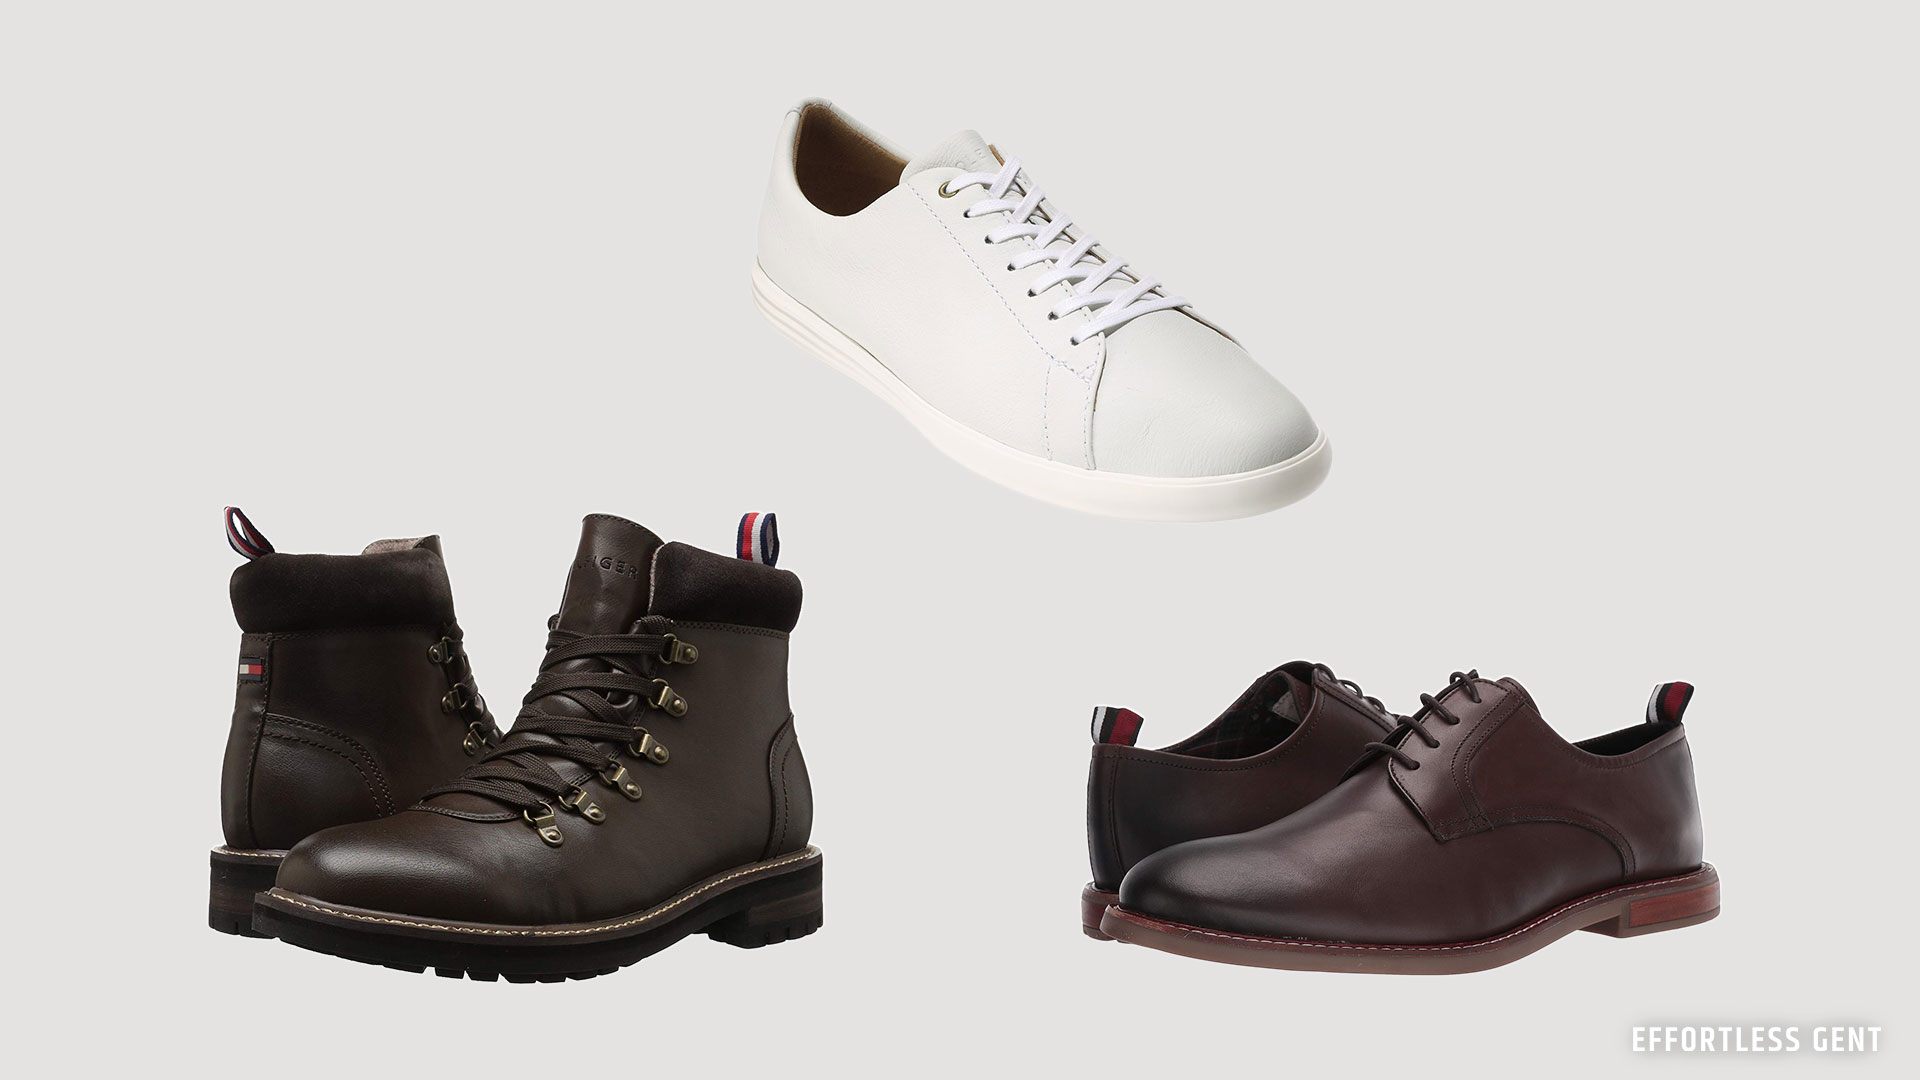 white sneakers, boots, and dress shoes for a man's budget minimal lean wardrobe